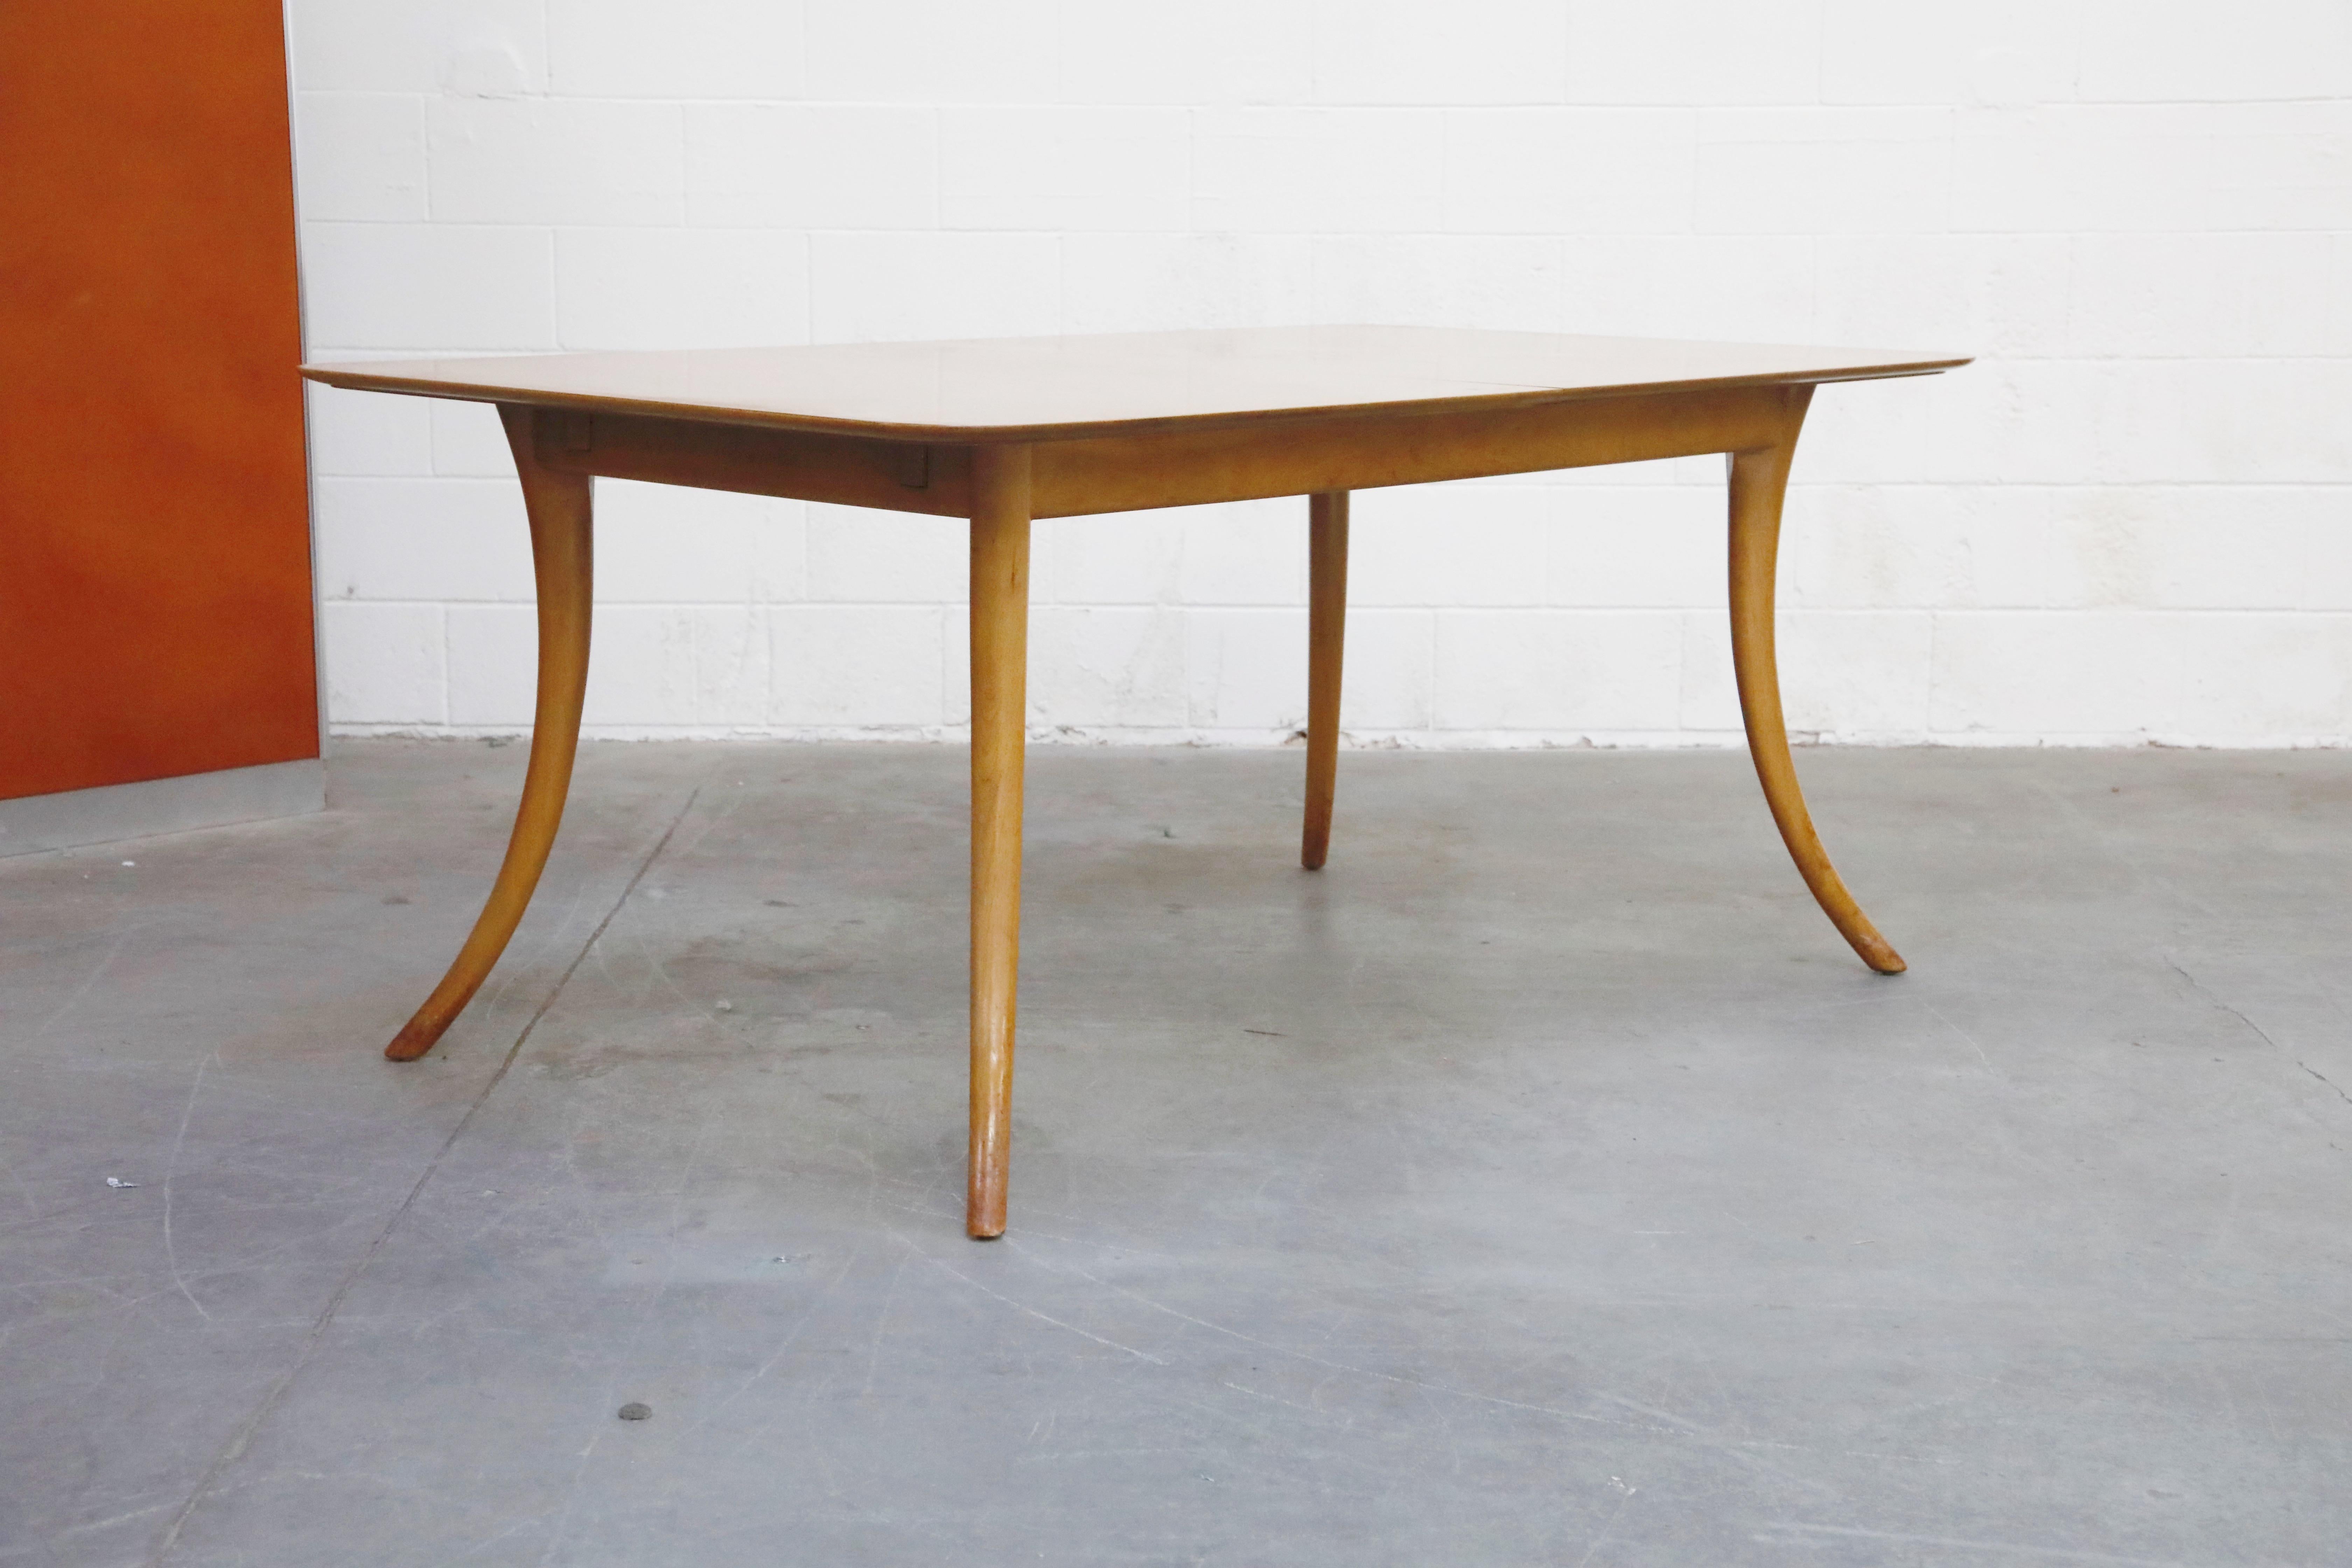 Mid-Century Modern Expandable Dining Table by T.H. Robsjohn-Gibbings for Widdicomb, 1957, Signed